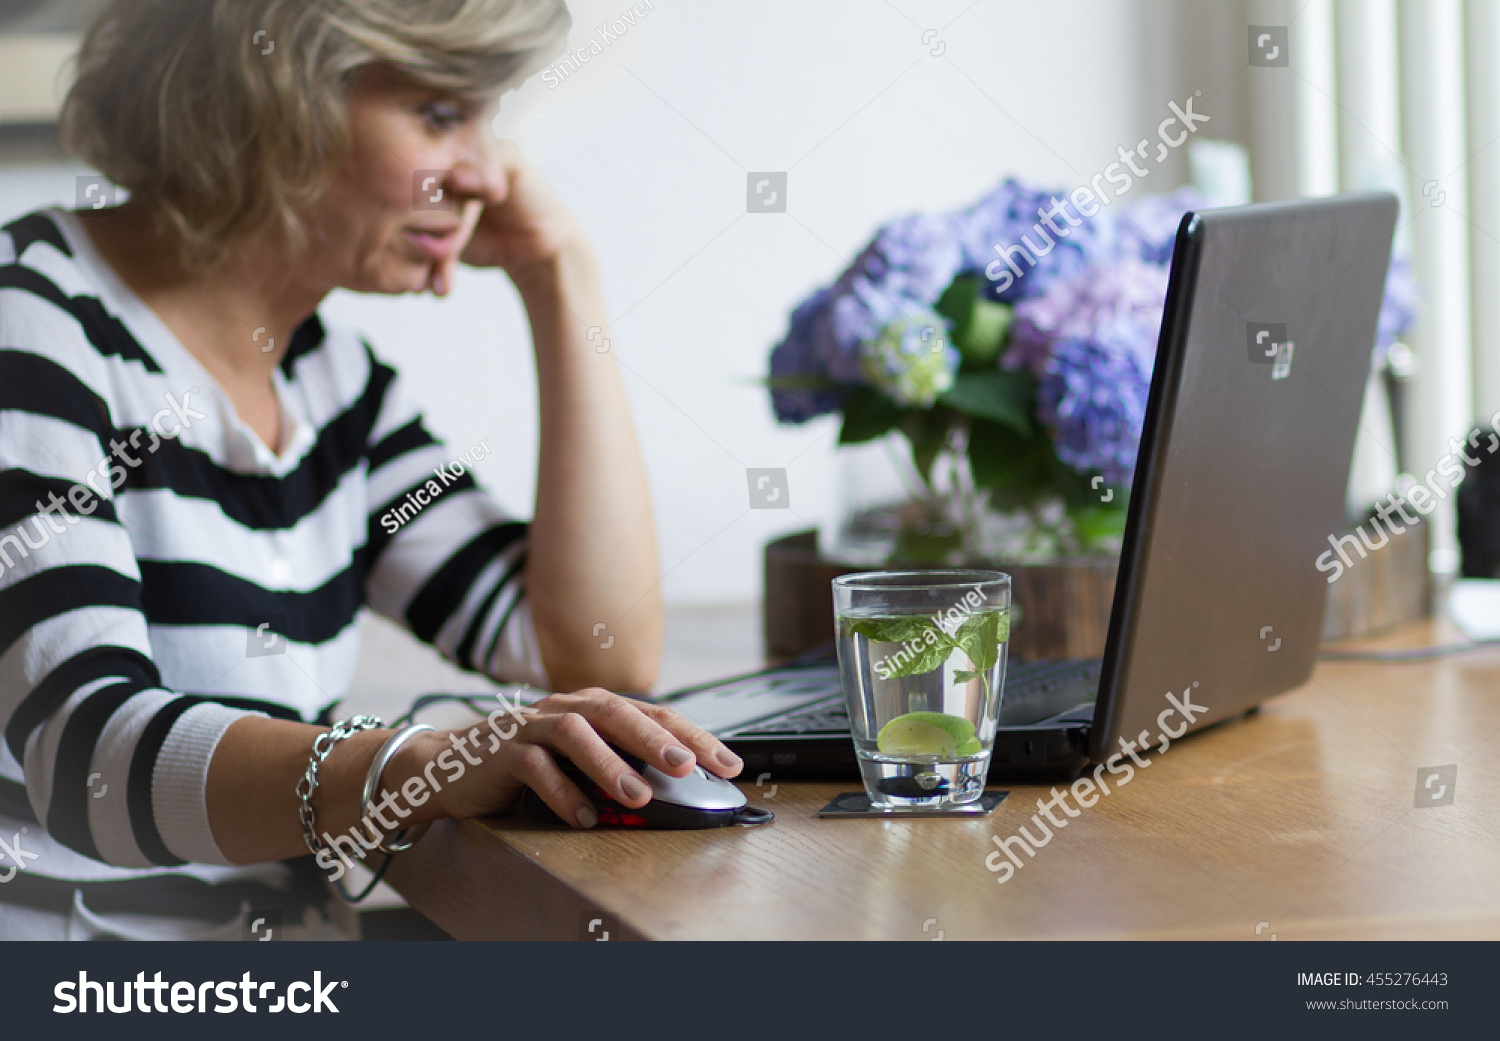 Attractive middle-aged blonde businesswoman working, using portable computer, looking at the monitor #455276443